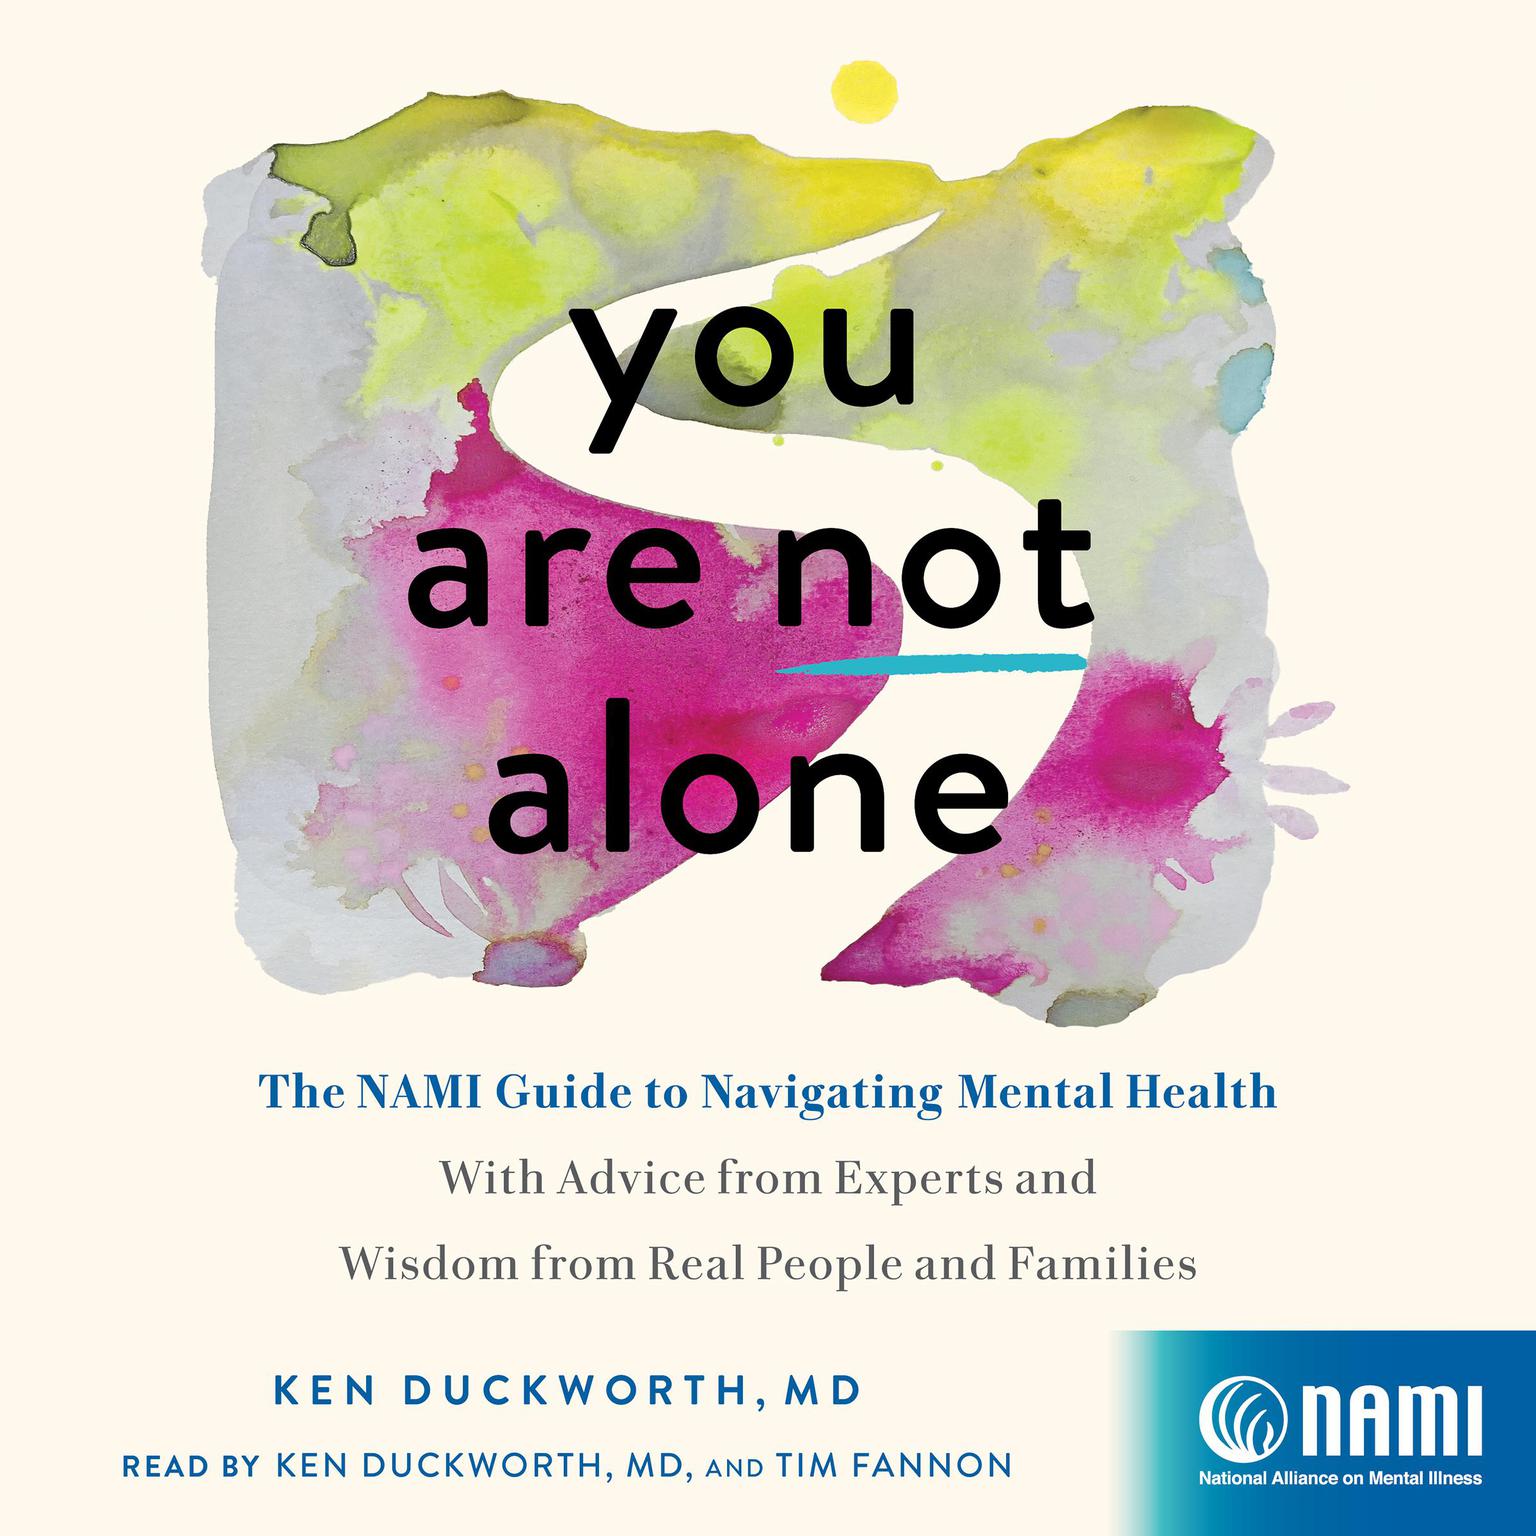 You Are Not Alone: The NAMI Guide to Navigating Mental Health―With Advice from Experts and Wisdom from Real People and Families Audiobook, by Ken Duckworth